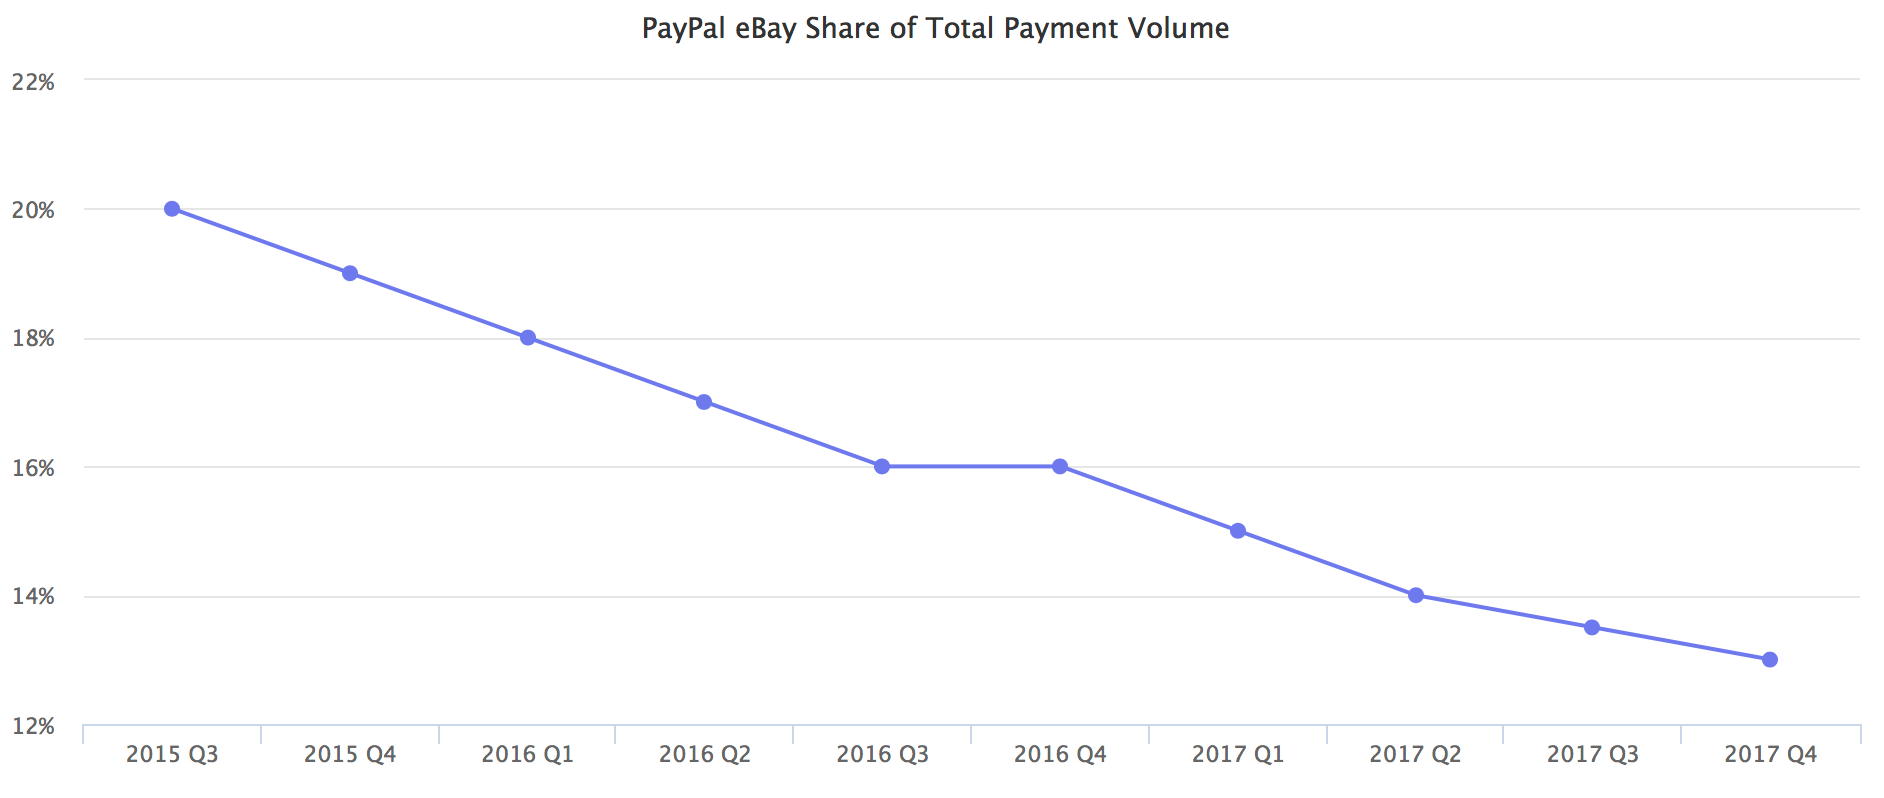 PayPal eBay Share of Total Payment Volume